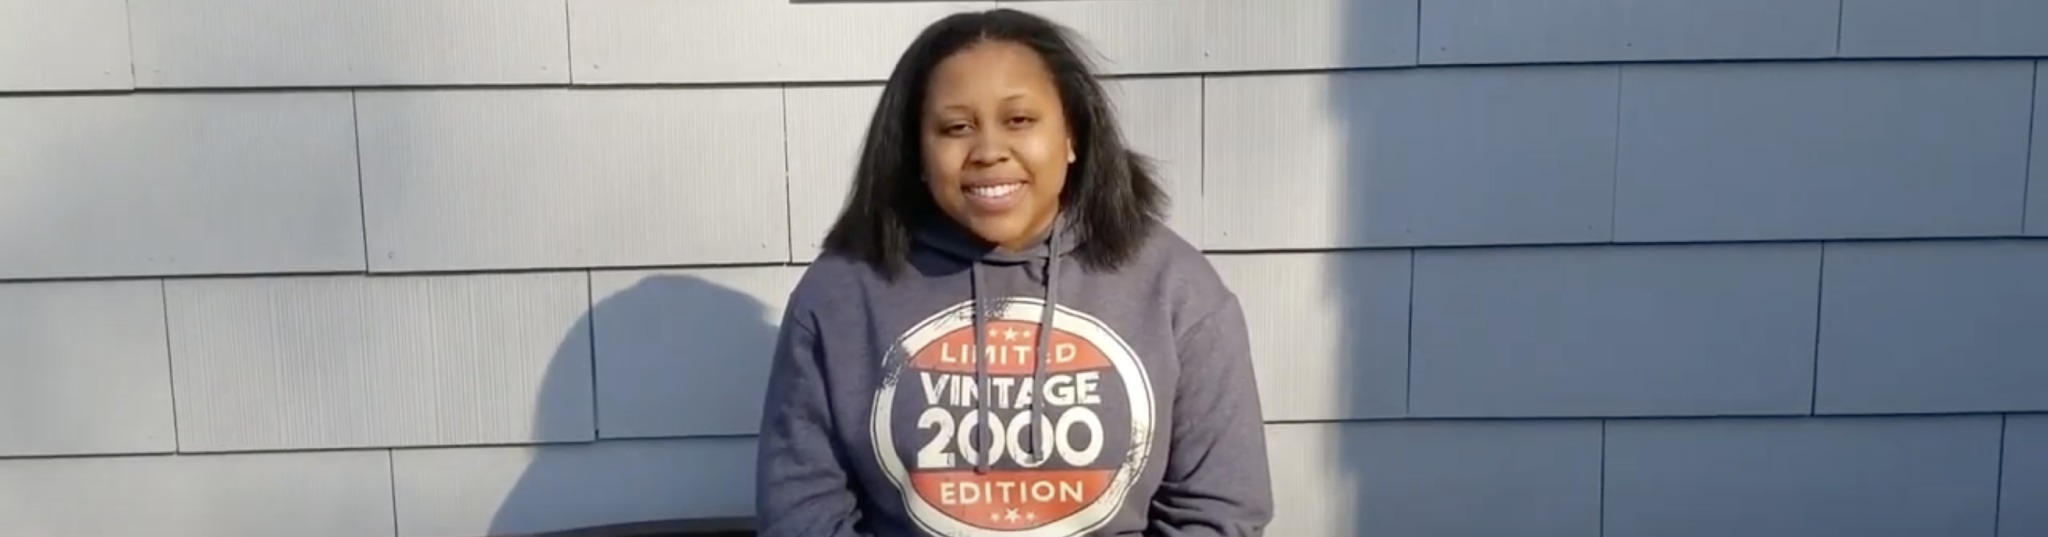 Daijah Patton wearing a Limited Vintage 2000 Edition Hoodie